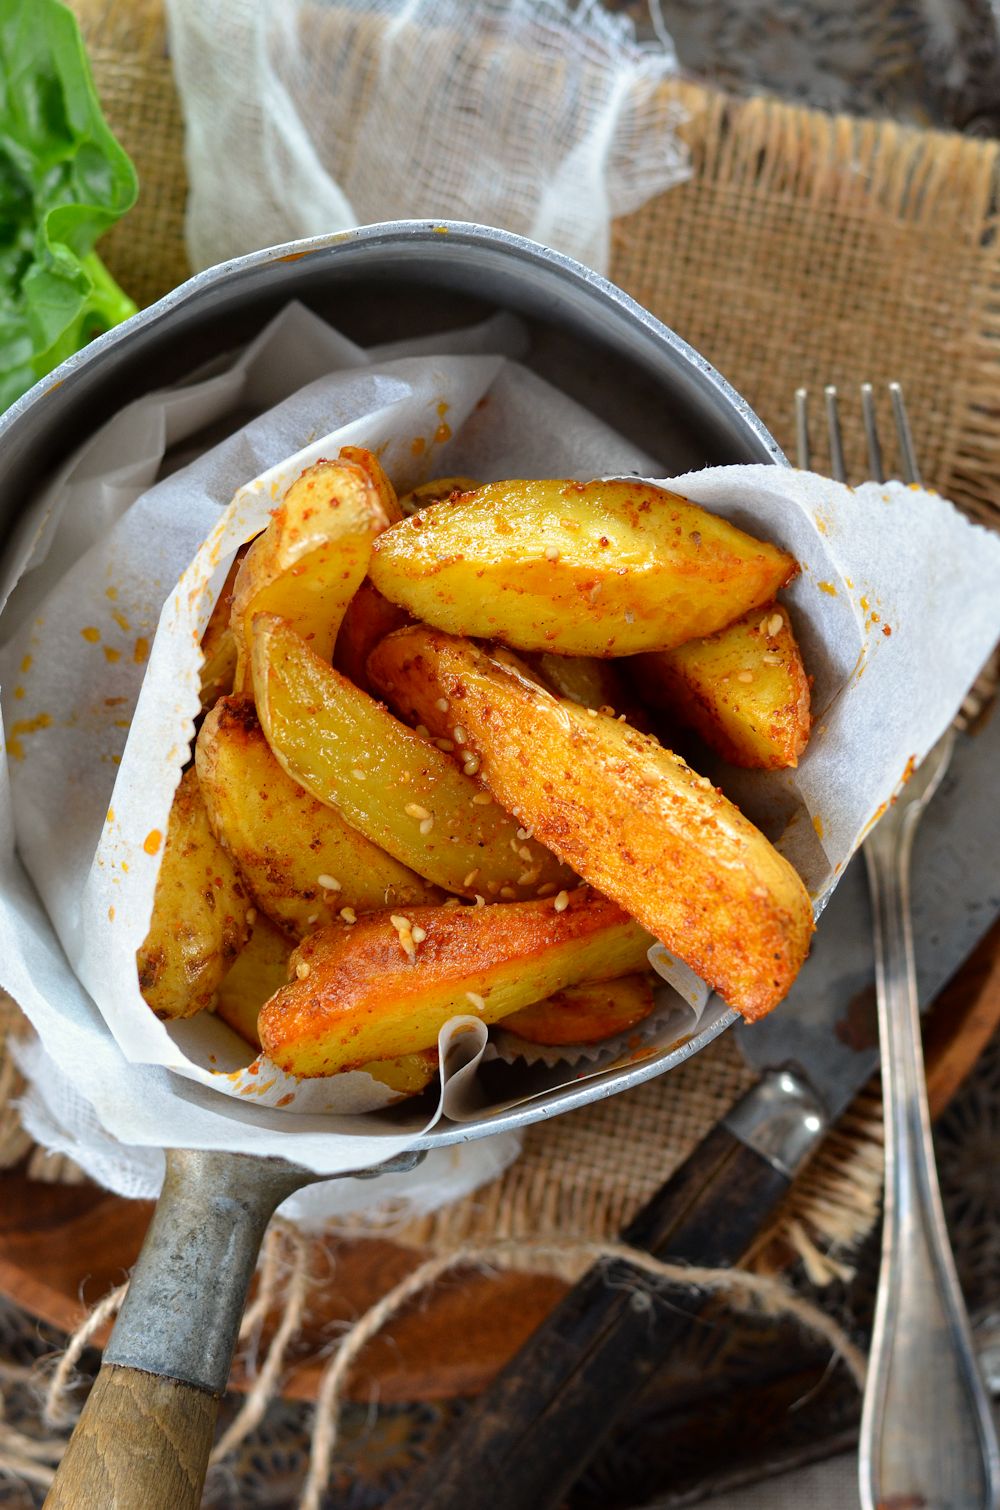 Oven-Baked Country Potatoes Recipe